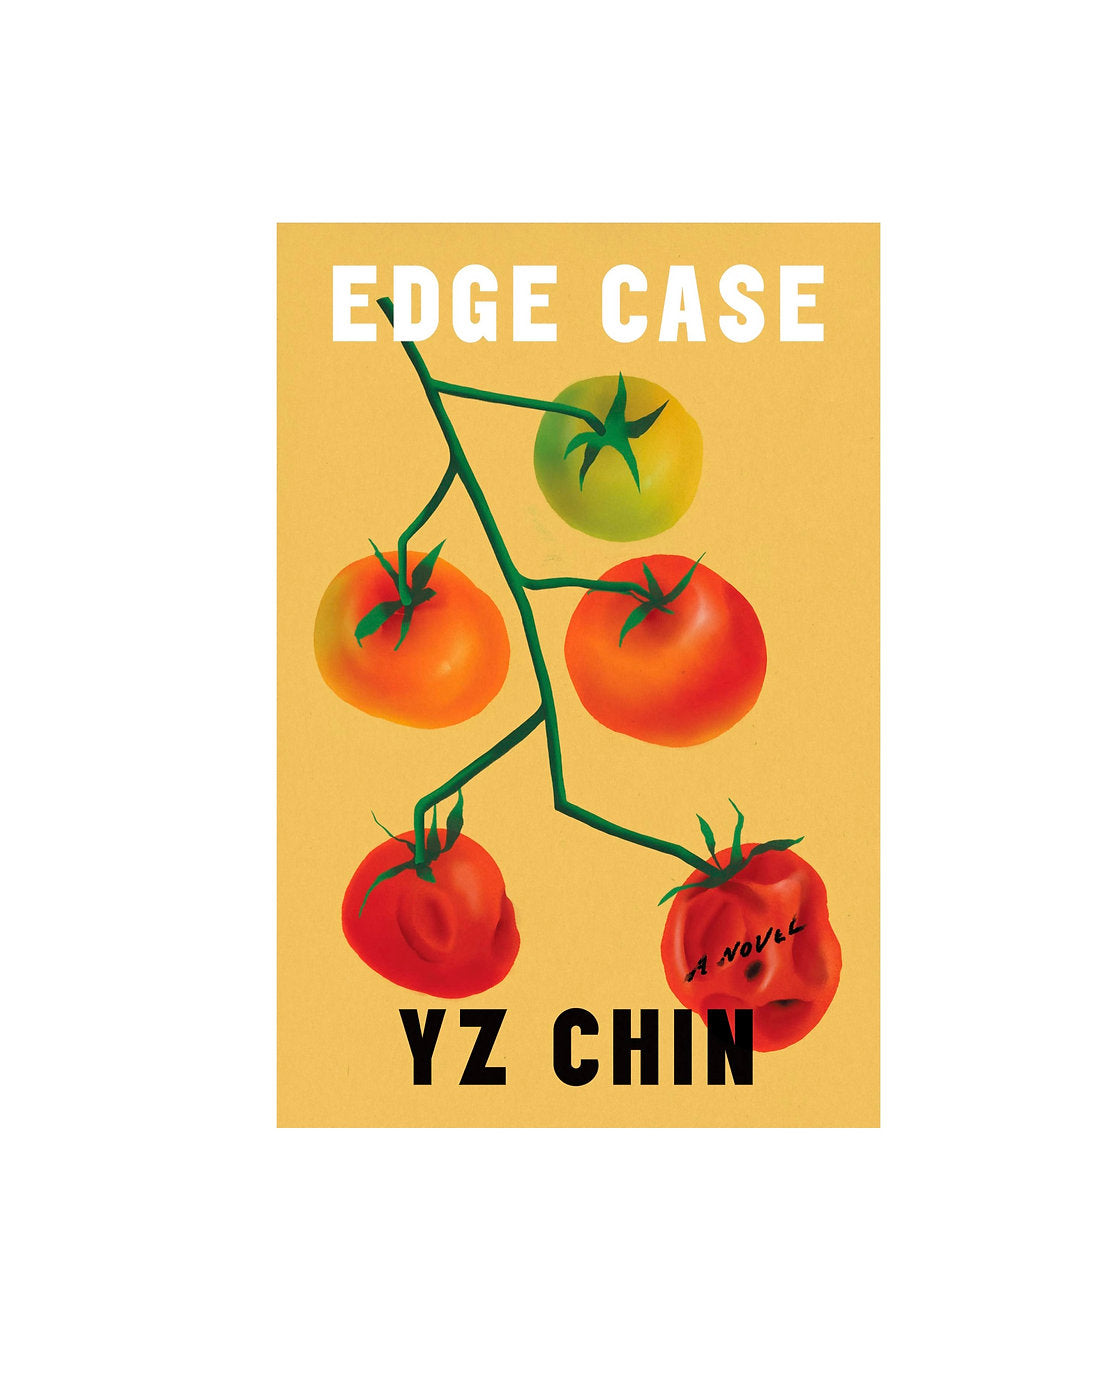 Edge Case / by YZ Chin